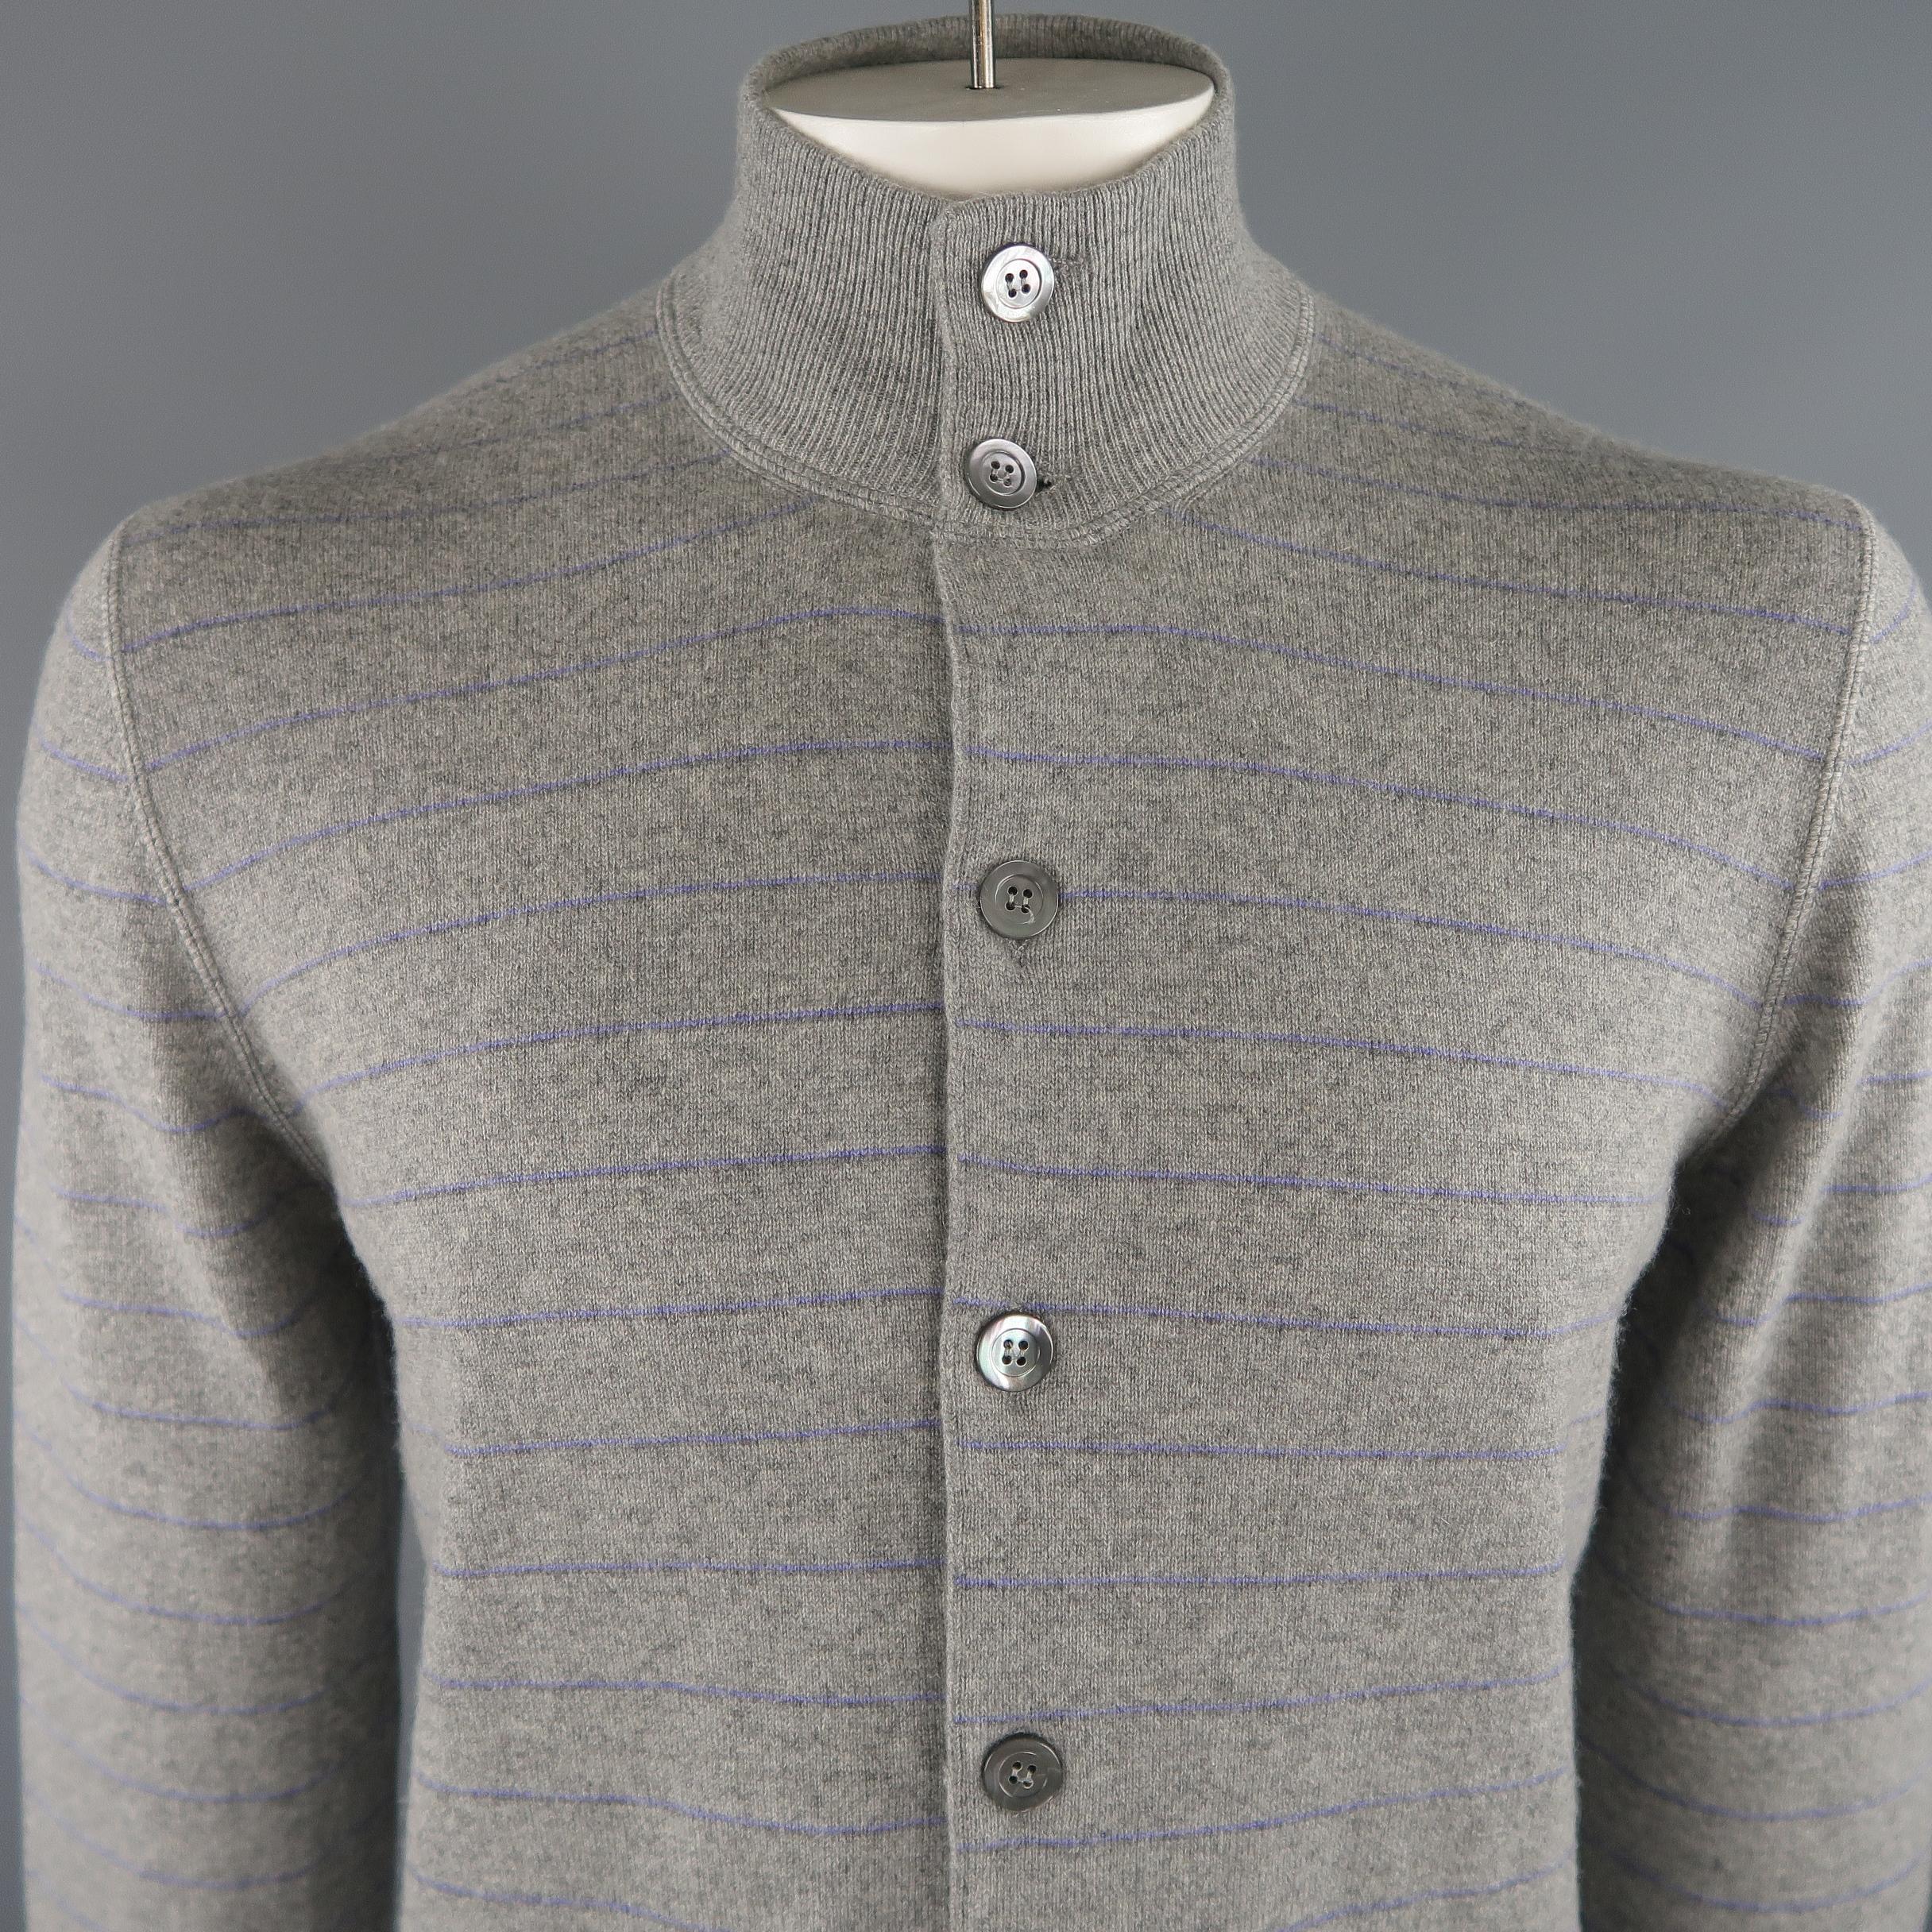 BRUNELLO CUCINELLI cardigan comes in grey and lavender tones, striped cashmere, with buttoned front, ribbed cuffs and waistband. Made in Italy.
 
New with Tags.
Marked: 52 IT
 
Measurements:
 
Shoulder: 17.5 in.
Chest: 44 in.
Sleeve: 27.5